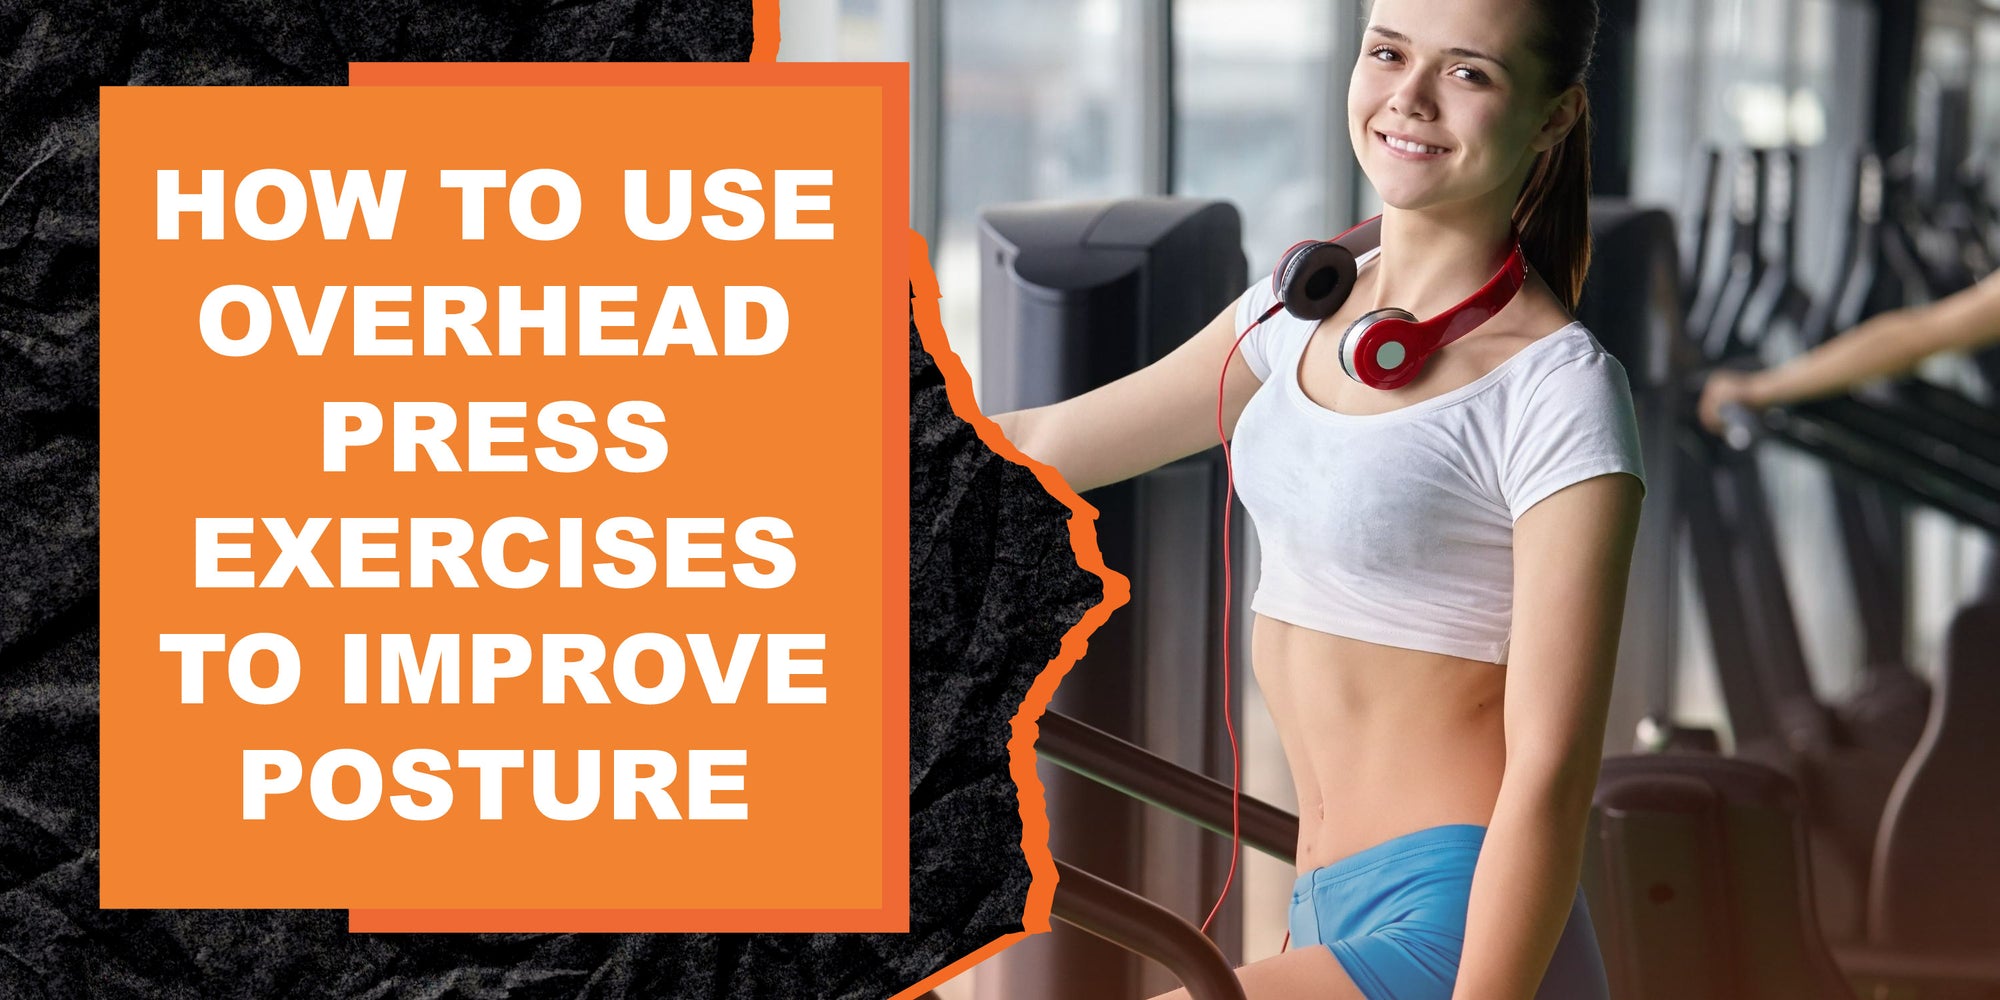 How to Use Overhead Press Exercises to Improve Posture